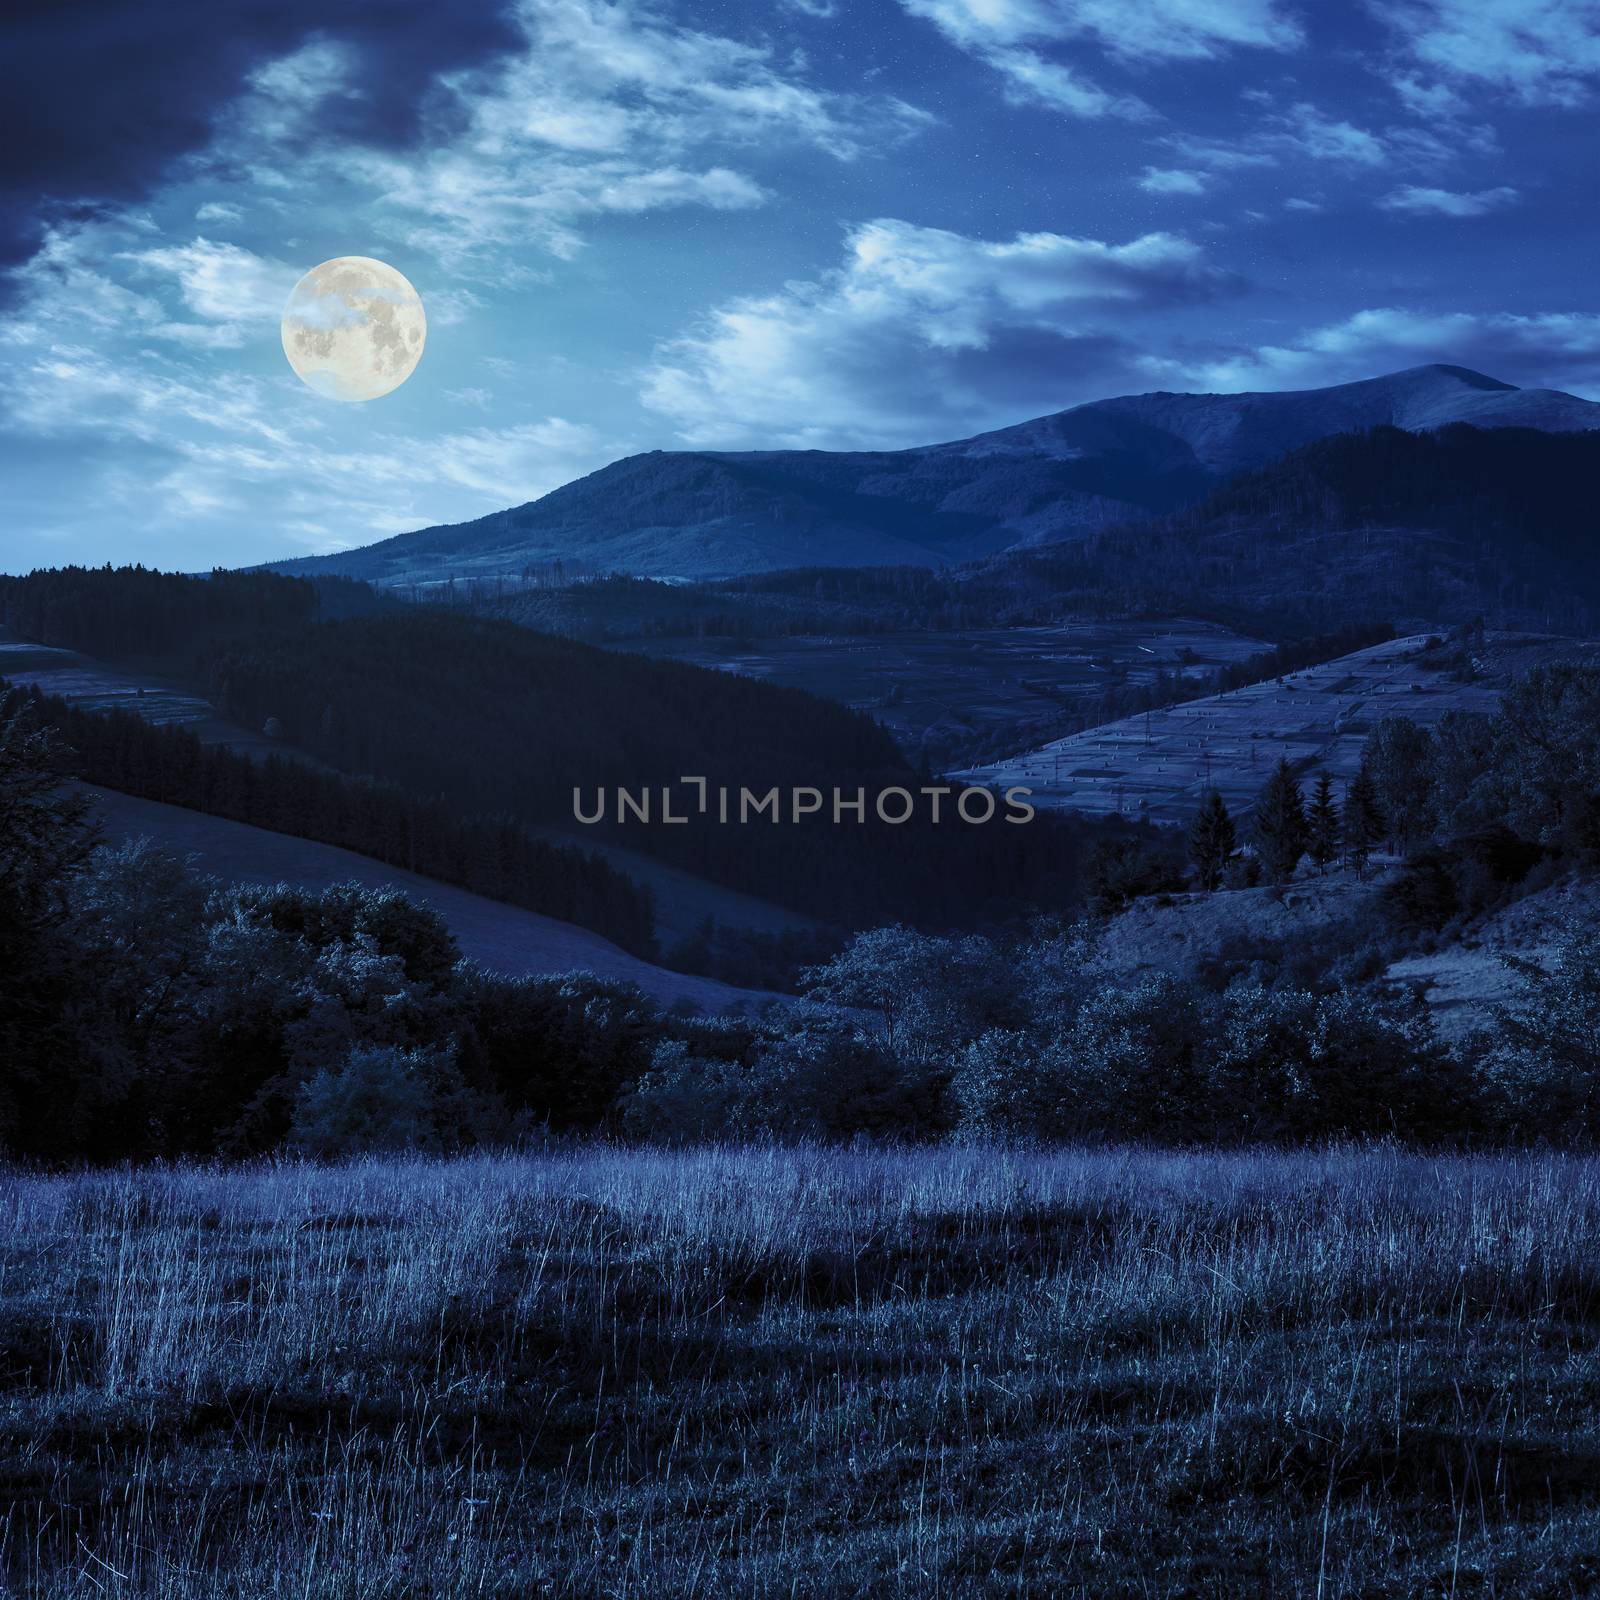 meadow on hillside near forest in mountains at night in full moon light